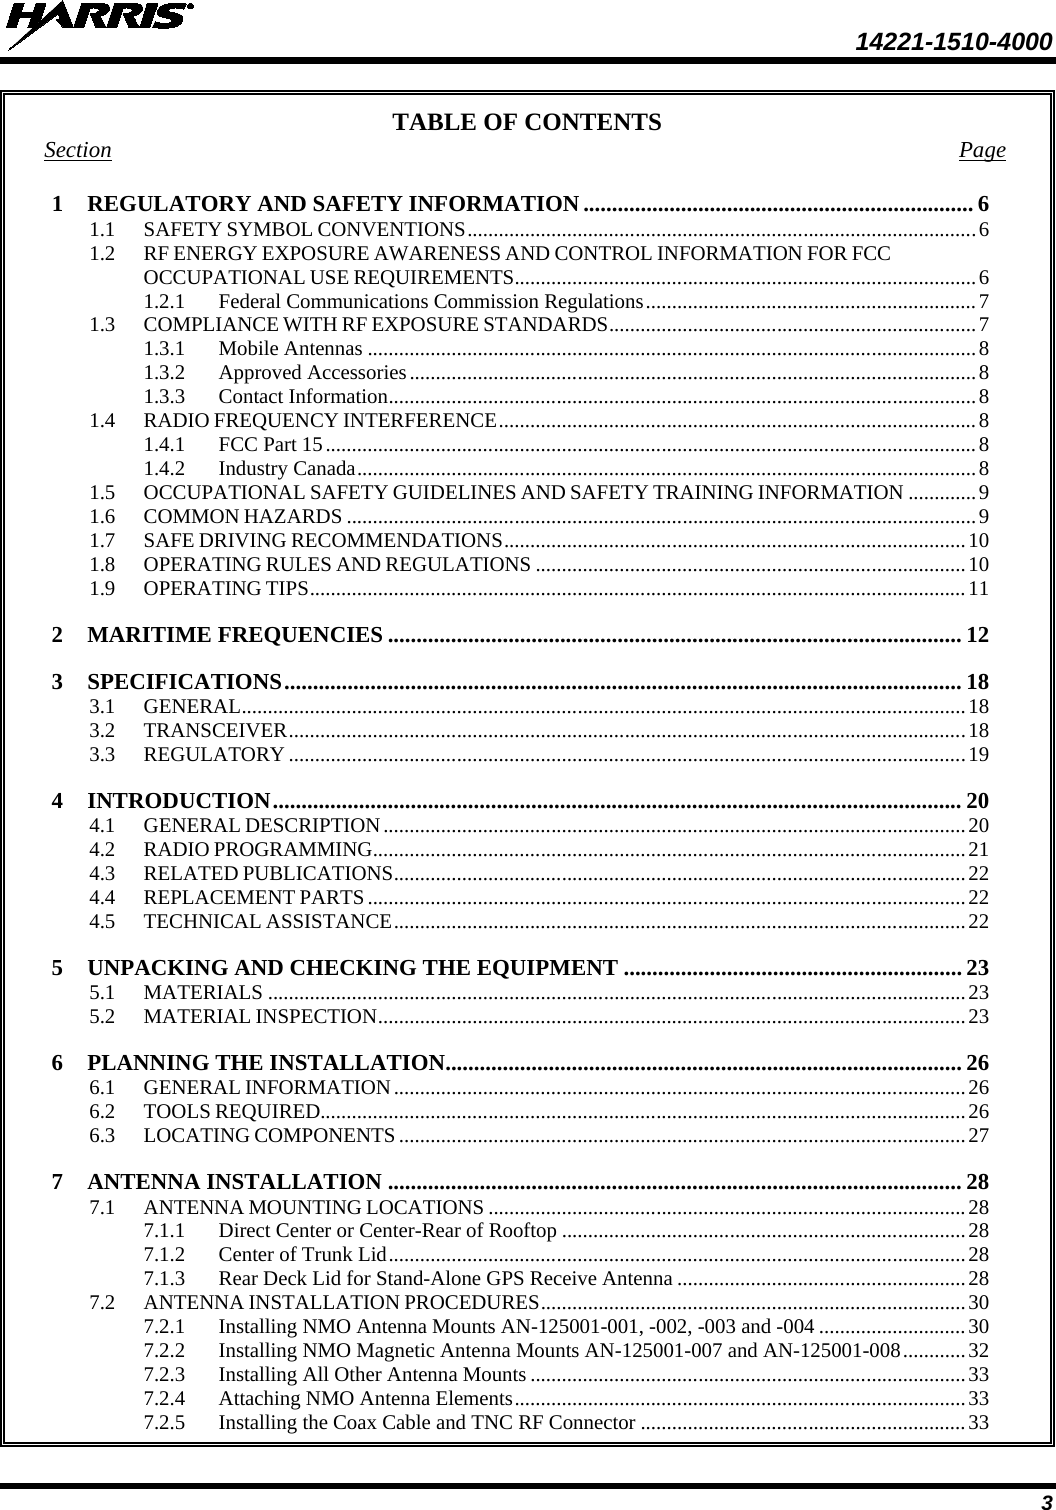  14221-1510-4000 3 TABLE OF CONTENTS Section Page 1 REGULATORY AND SAFETY INFORMATION .................................................................... 6 1.1 SAFETY SYMBOL CONVENTIONS ................................................................................................. 6 1.2 RF ENERGY EXPOSURE AWARENESS AND CONTROL INFORMATION FOR FCC OCCUPATIONAL USE REQUIREMENTS ........................................................................................ 6 1.2.1 Federal Communications Commission Regulations ............................................................... 7 1.3 COMPLIANCE WITH RF EXPOSURE STANDARDS ...................................................................... 7 1.3.1 Mobile Antennas .................................................................................................................... 8 1.3.2 Approved Accessories ............................................................................................................ 8 1.3.3 Contact Information ................................................................................................................ 8 1.4 RADIO FREQUENCY INTERFERENCE ........................................................................................... 8 1.4.1 FCC Part 15 ............................................................................................................................ 8 1.4.2 Industry Canada ...................................................................................................................... 8 1.5 OCCUPATIONAL SAFETY GUIDELINES AND SAFETY TRAINING INFORMATION ............. 9 1.6 COMMON HAZARDS ........................................................................................................................ 9 1.7 SAFE DRIVING RECOMMENDATIONS ........................................................................................ 10 1.8 OPERATING RULES AND REGULATIONS .................................................................................. 10 1.9 OPERATING TIPS ............................................................................................................................. 11 2 MARITIME FREQUENCIES .................................................................................................... 12 3 SPECIFICATIONS ...................................................................................................................... 18 3.1 GENERAL .......................................................................................................................................... 18 3.2 TRANSCEIVER ................................................................................................................................. 18 3.3 REGULATORY ................................................................................................................................. 19 4 INTRODUCTION ........................................................................................................................ 20 4.1 GENERAL DESCRIPTION ............................................................................................................... 20 4.2 RADIO PROGRAMMING ................................................................................................................. 21 4.3 RELATED PUBLICATIONS ............................................................................................................. 22 4.4 REPLACEMENT PARTS .................................................................................................................. 22 4.5 TECHNICAL ASSISTANCE ............................................................................................................. 22 5 UNPACKING AND CHECKING THE EQUIPMENT ........................................................... 23 5.1 MATERIALS ..................................................................................................................................... 23 5.2 MATERIAL INSPECTION ................................................................................................................ 23 6 PLANNING THE INSTALLATION.......................................................................................... 26 6.1 GENERAL INFORMATION ............................................................................................................. 26 6.2 TOOLS REQUIRED........................................................................................................................... 26 6.3 LOCATING COMPONENTS ............................................................................................................ 27 7 ANTENNA INSTALLATION .................................................................................................... 28 7.1 ANTENNA MOUNTING LOCATIONS ........................................................................................... 28 7.1.1 Direct Center or Center-Rear of Rooftop ............................................................................. 28 7.1.2 Center of Trunk Lid .............................................................................................................. 28 7.1.3 Rear Deck Lid for Stand-Alone GPS Receive Antenna ....................................................... 28 7.2 ANTENNA INSTALLATION PROCEDURES ................................................................................. 30 7.2.1 Installing NMO Antenna Mounts AN-125001-001, -002, -003 and -004 ............................ 30 7.2.2 Installing NMO Magnetic Antenna Mounts AN-125001-007 and AN-125001-008 ............ 32 7.2.3 Installing All Other Antenna Mounts ................................................................................... 33 7.2.4 Attaching NMO Antenna Elements ...................................................................................... 33 7.2.5 Installing the Coax Cable and TNC RF Connector .............................................................. 33 